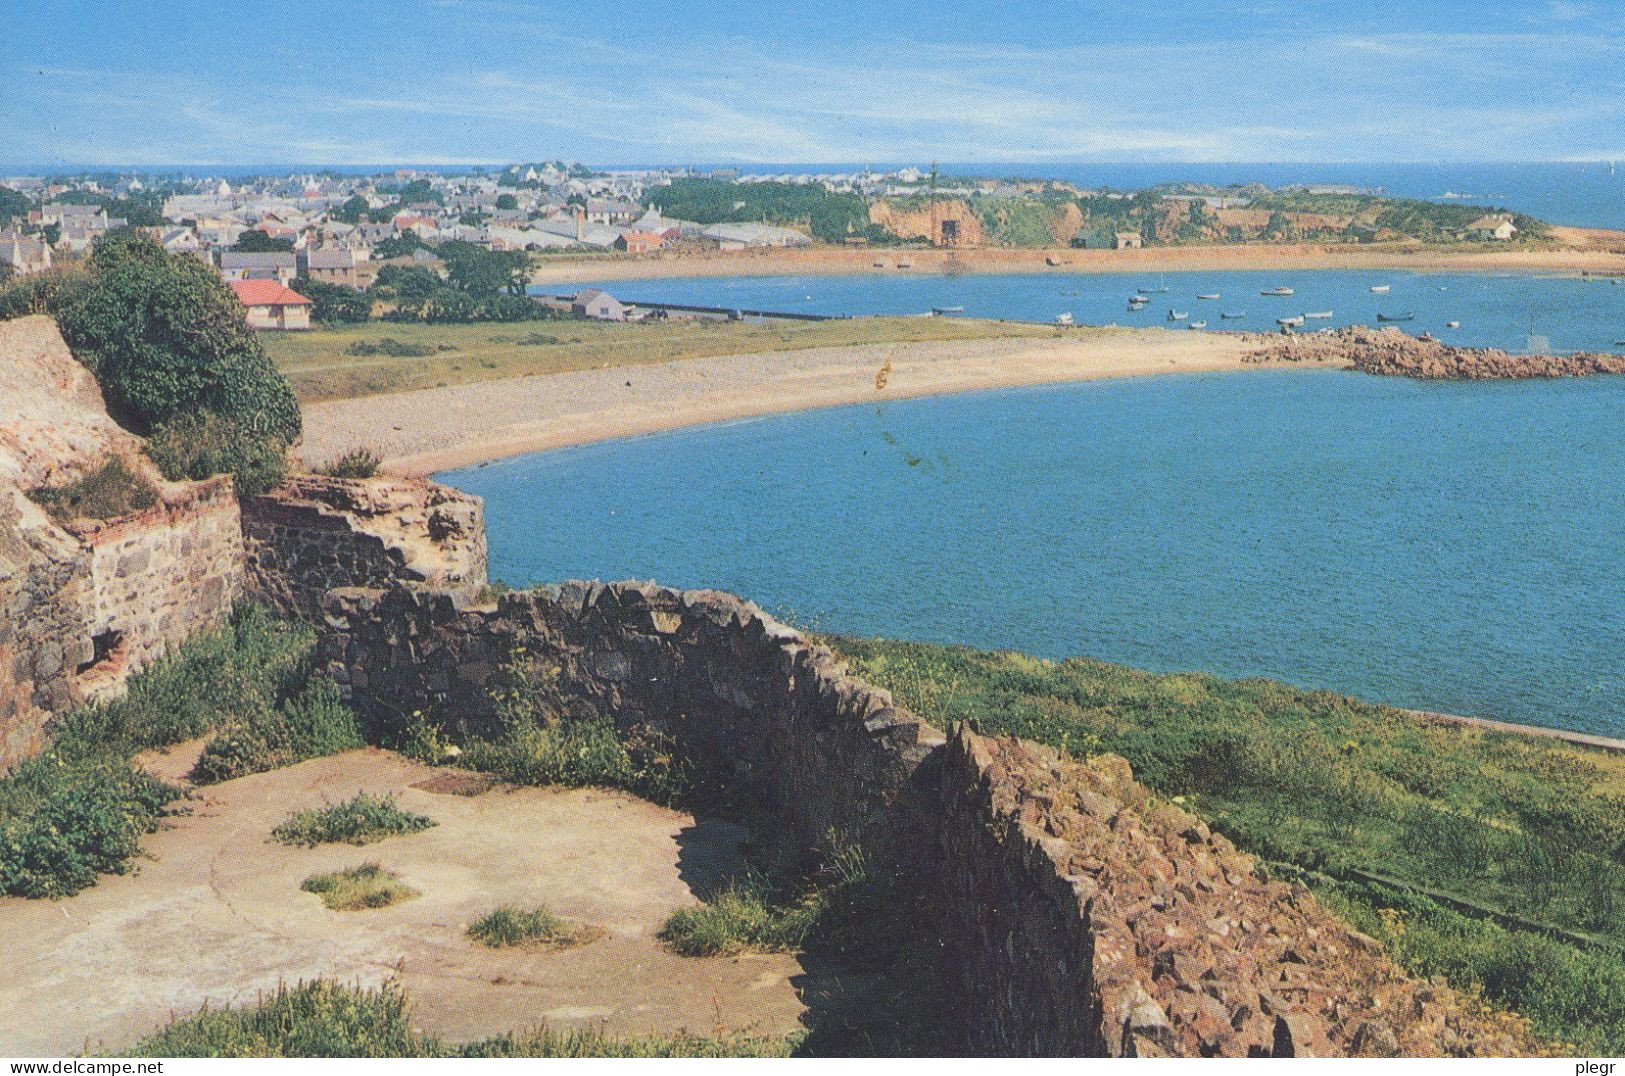 1-GBR04 02 02 - GUERNESEY - BORDEAUX BAY FROM VALE CASTLE - Guernsey